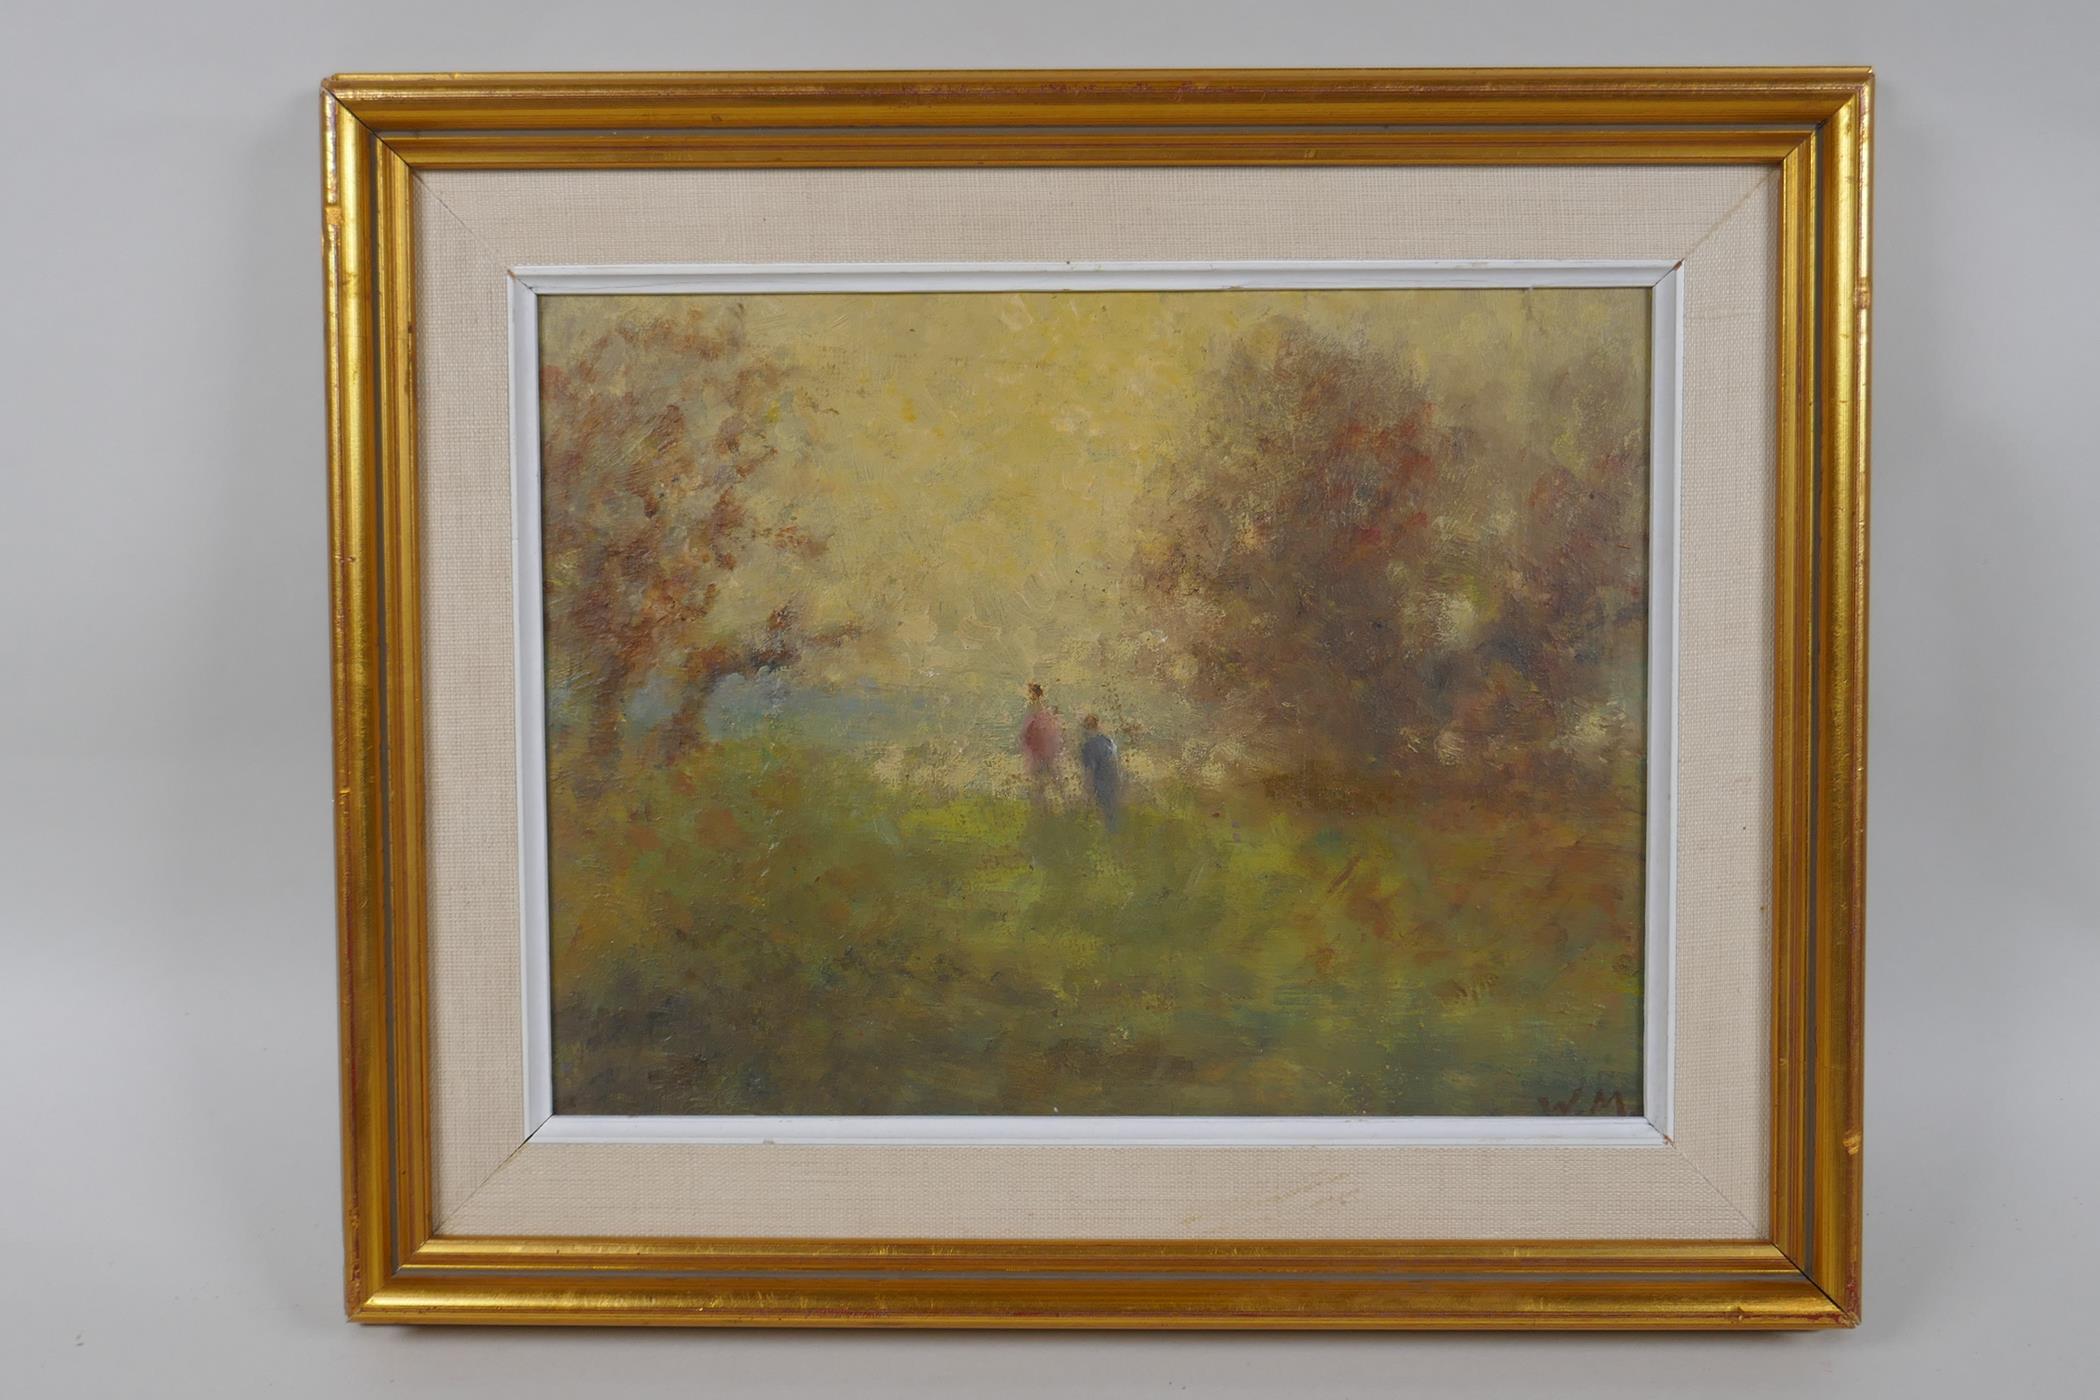 William Mason, figures by a woodland pond at sunset, monogrammed, oil on board, 19 x 25cm - Image 2 of 4